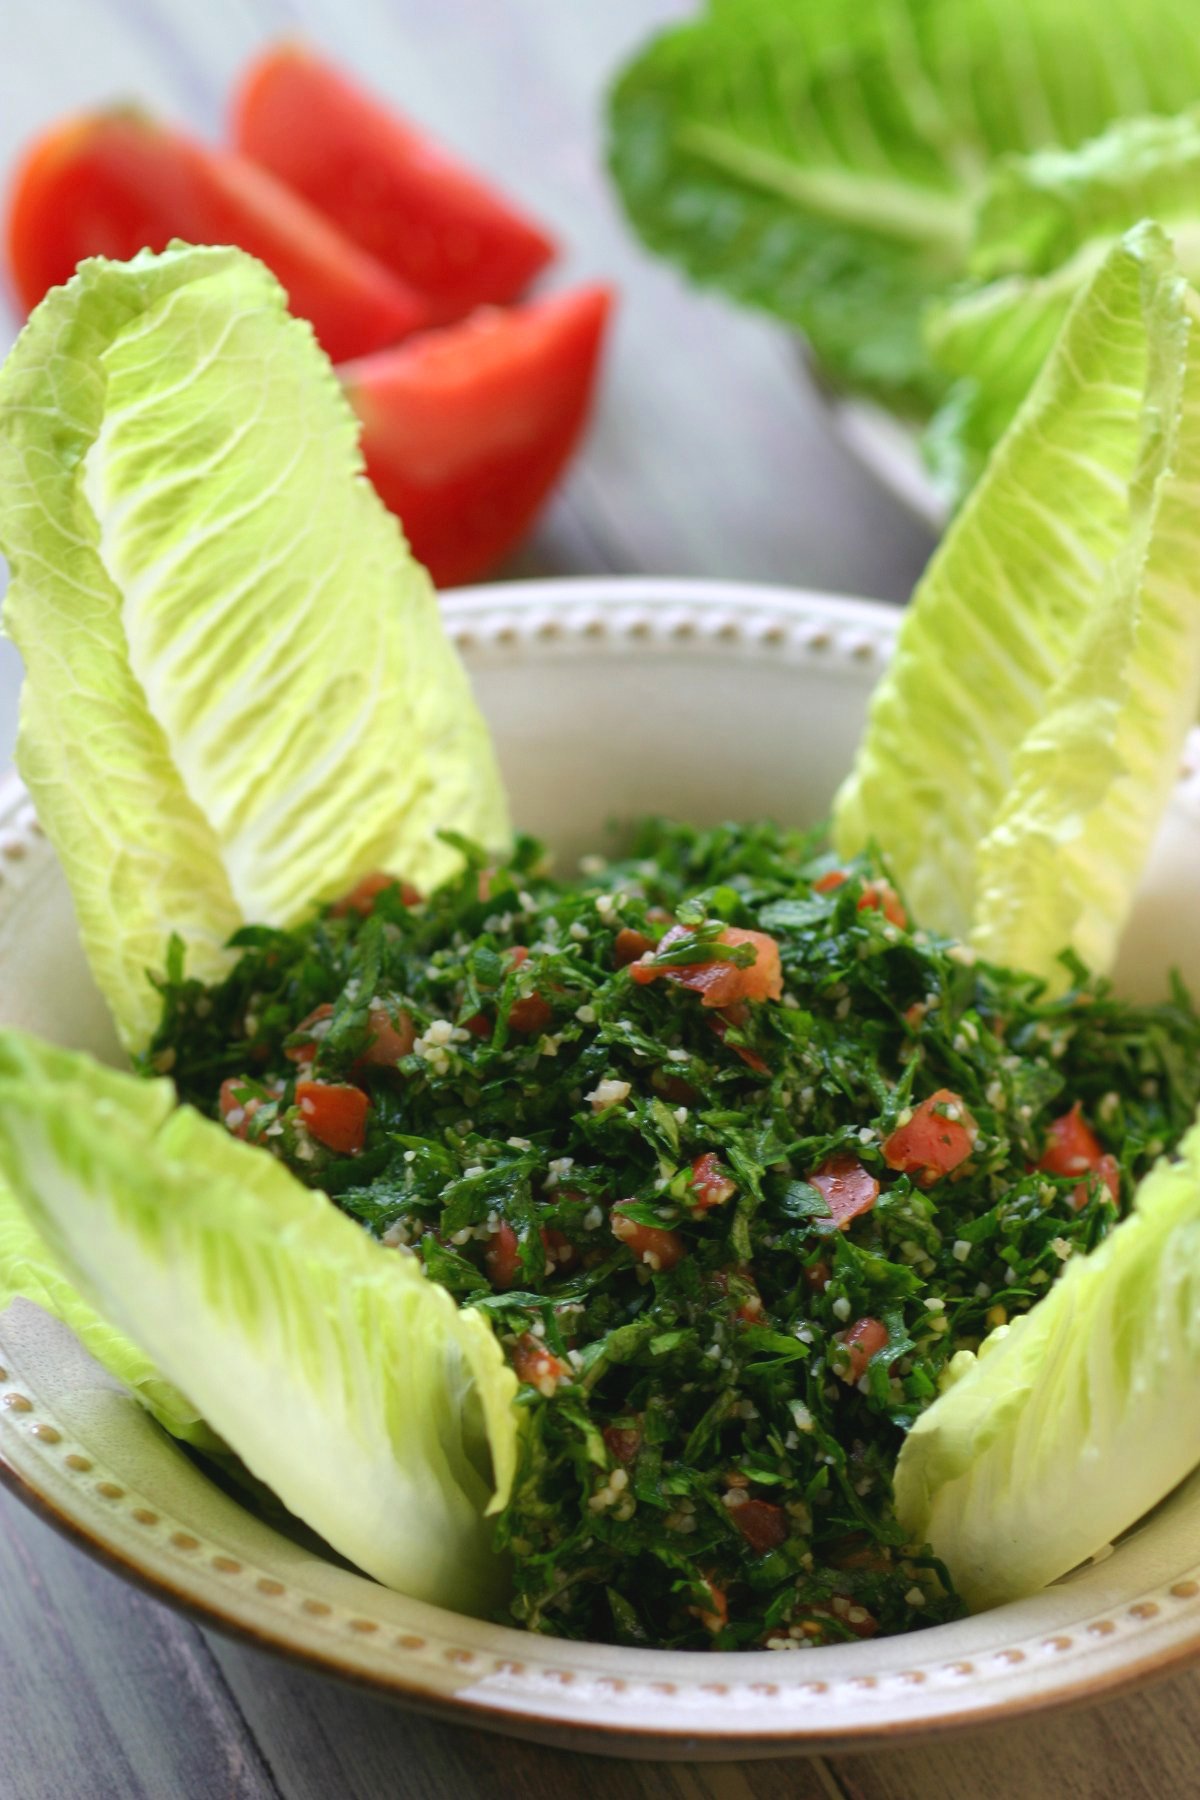 This recipe for Tabbouleh is everything you want it to be: tangy, juicy, and refreshing. Herbs, tomatoes, and bulgur combine to make a mouthwatering salad.